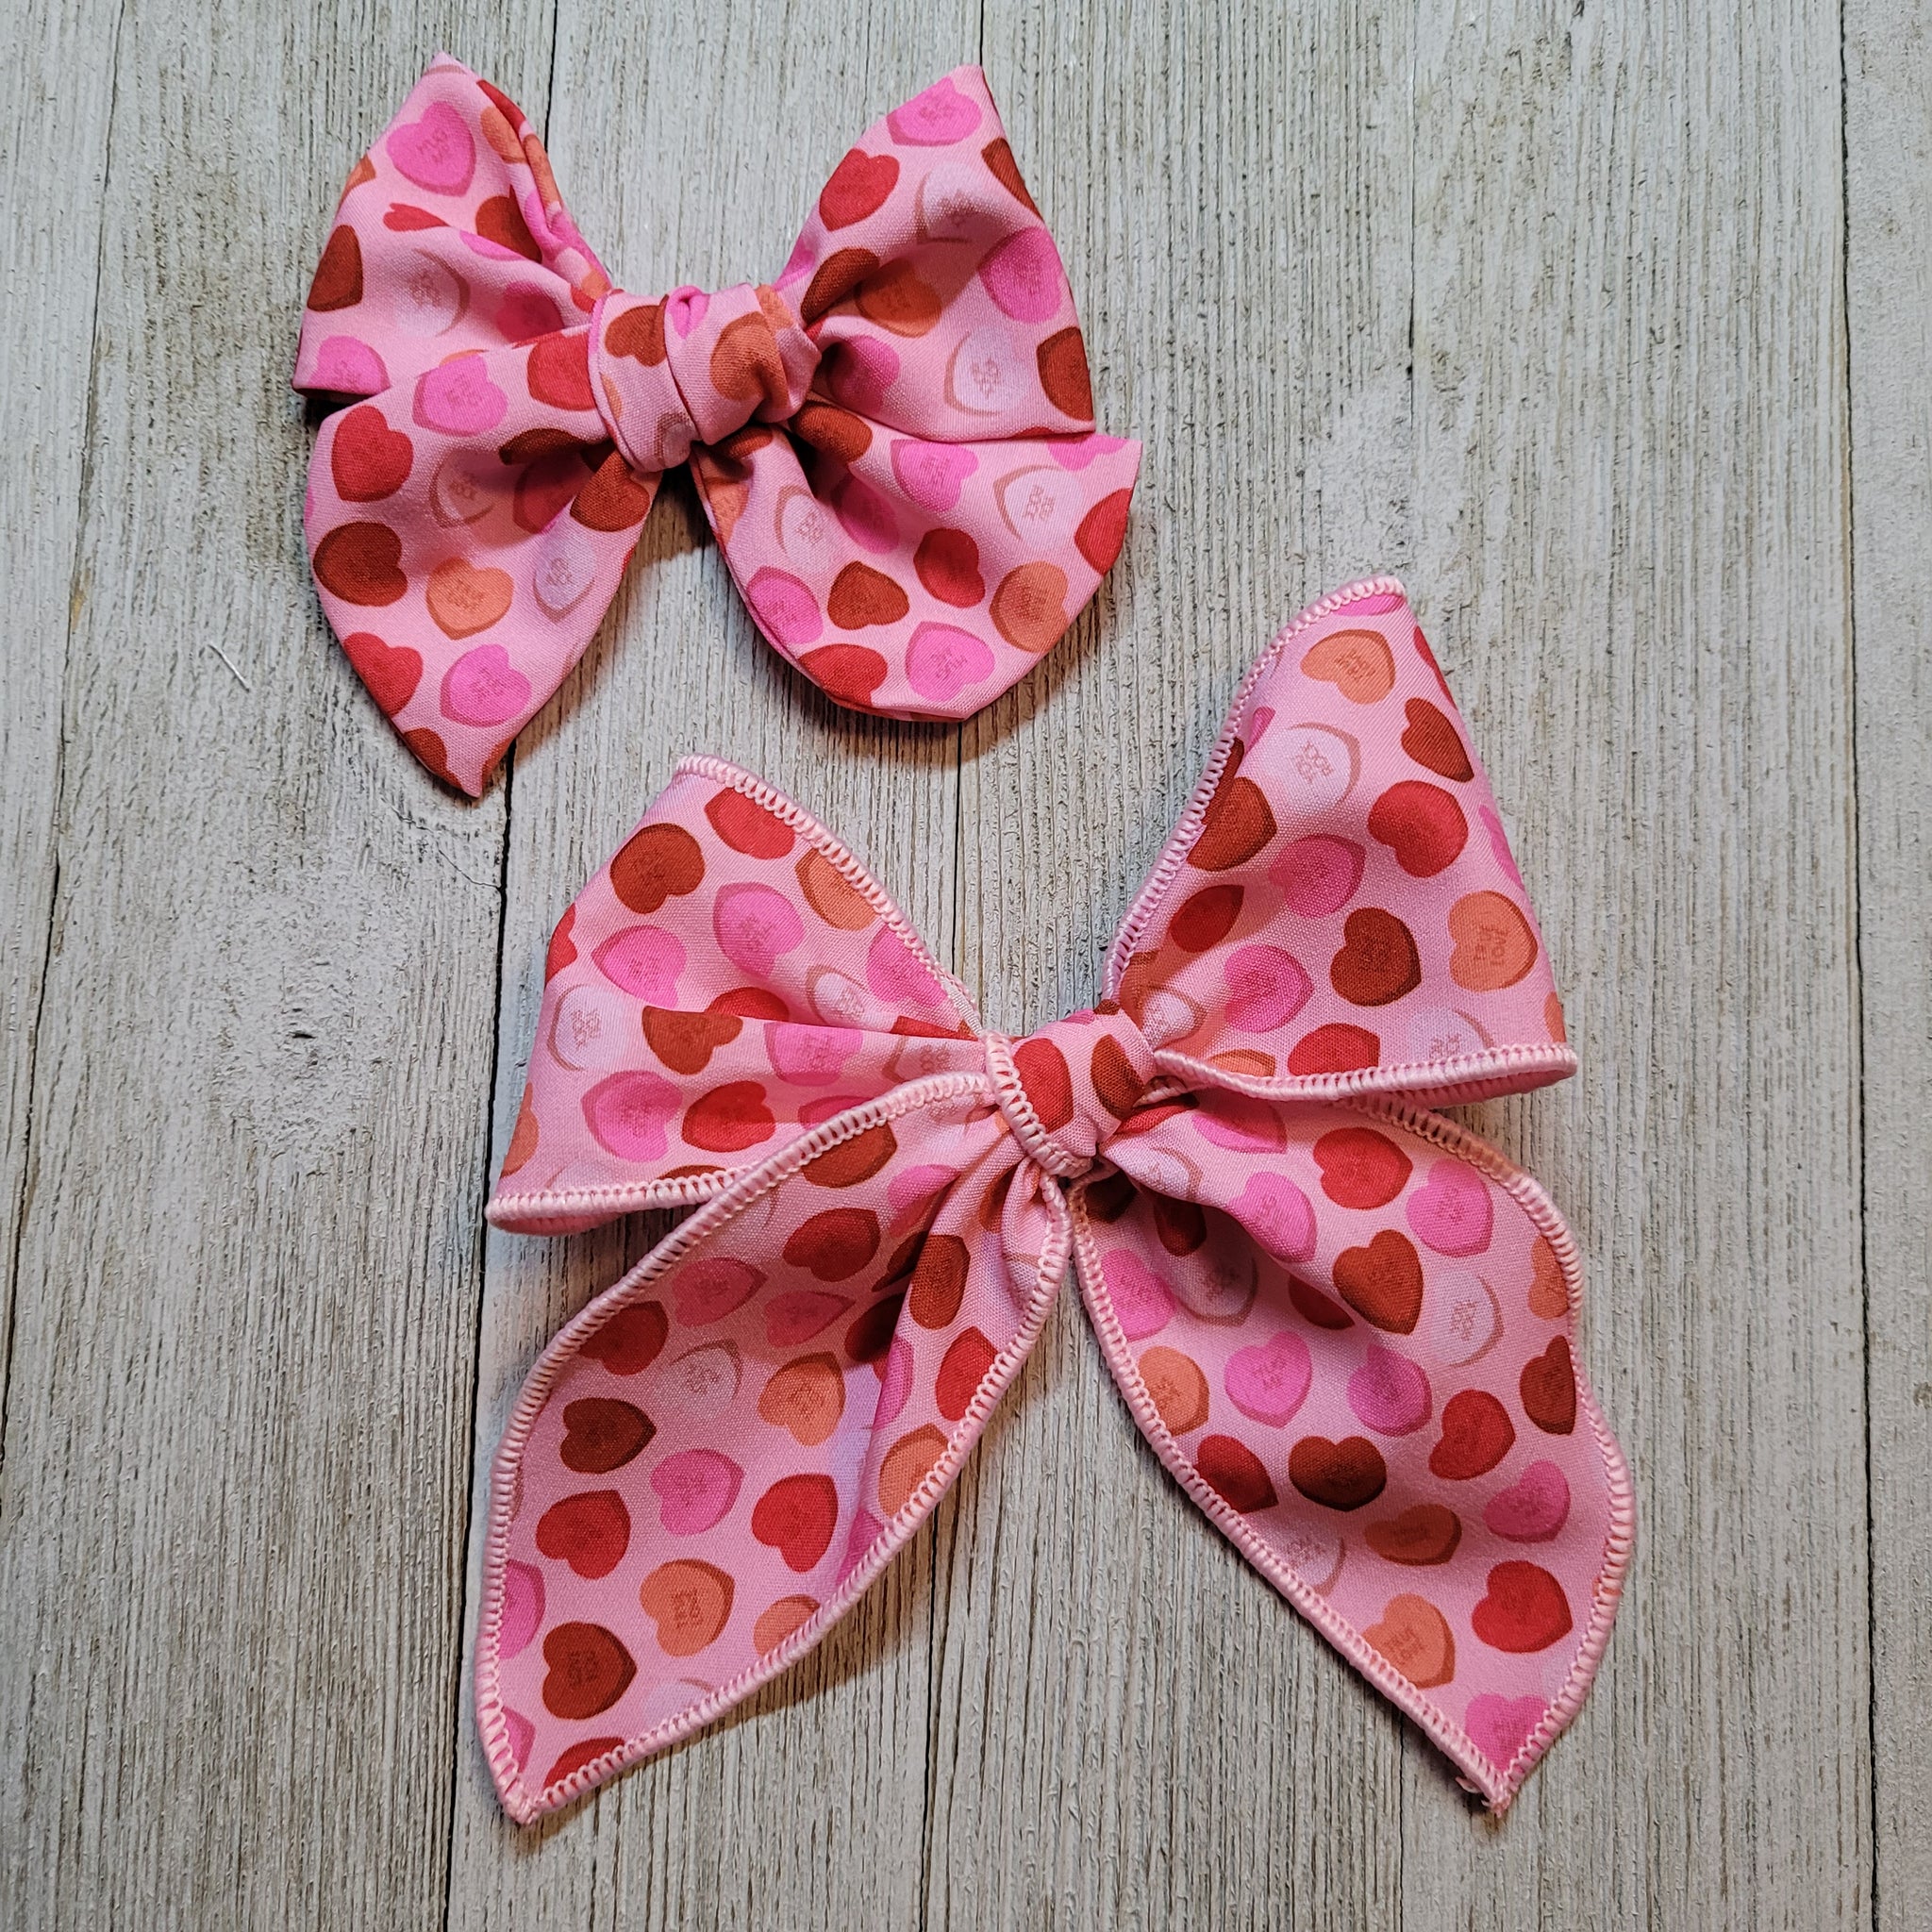 3 inch Bow or 5 inch heart Bow either clip or nylon Headband